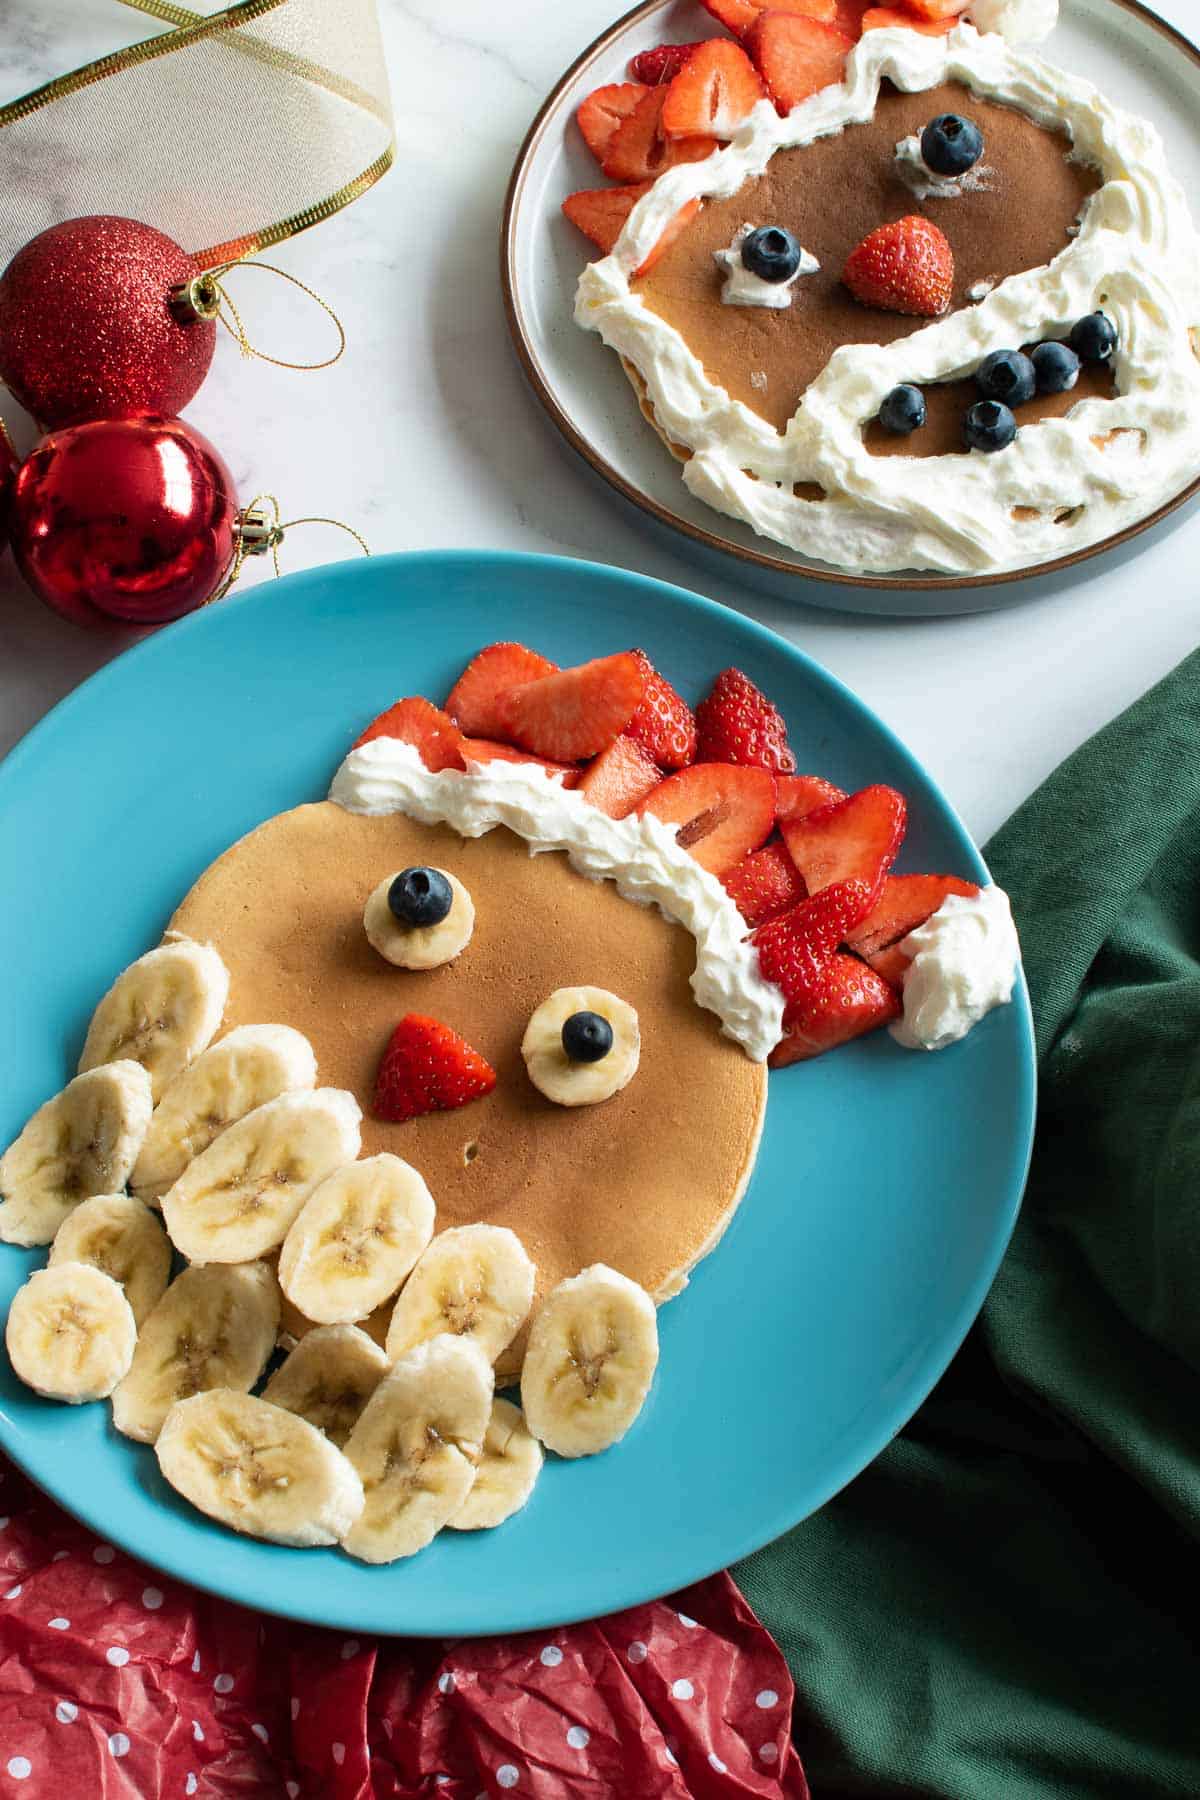 Santa pancakes for Christmas, with whipped cream, strawberries, bananas and blueberries.